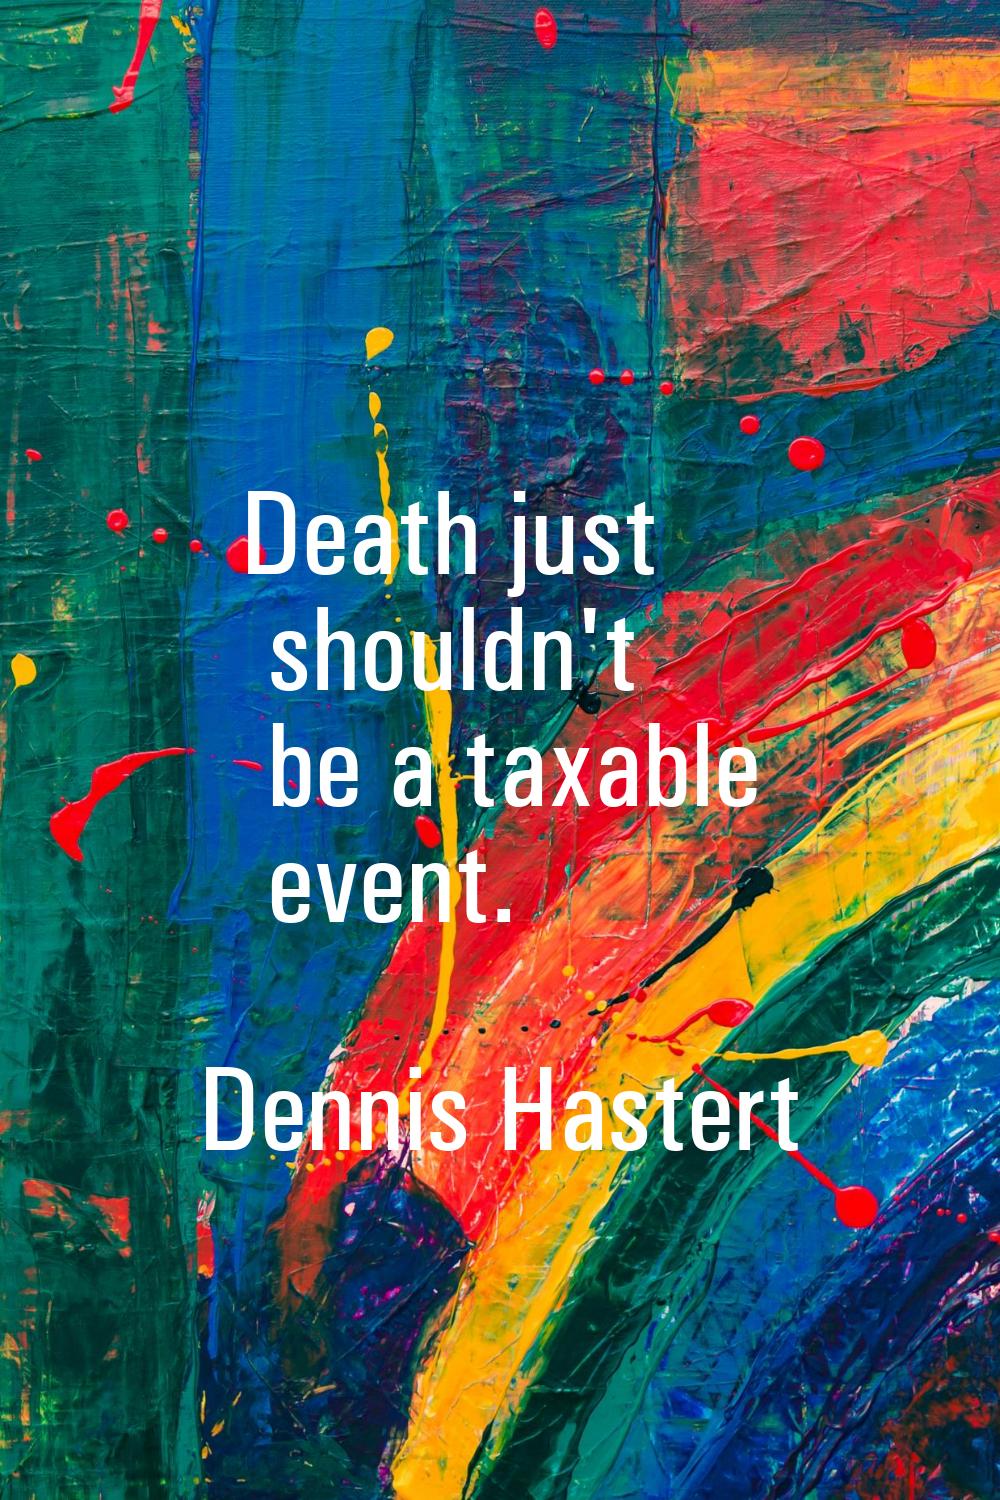 Death just shouldn't be a taxable event.